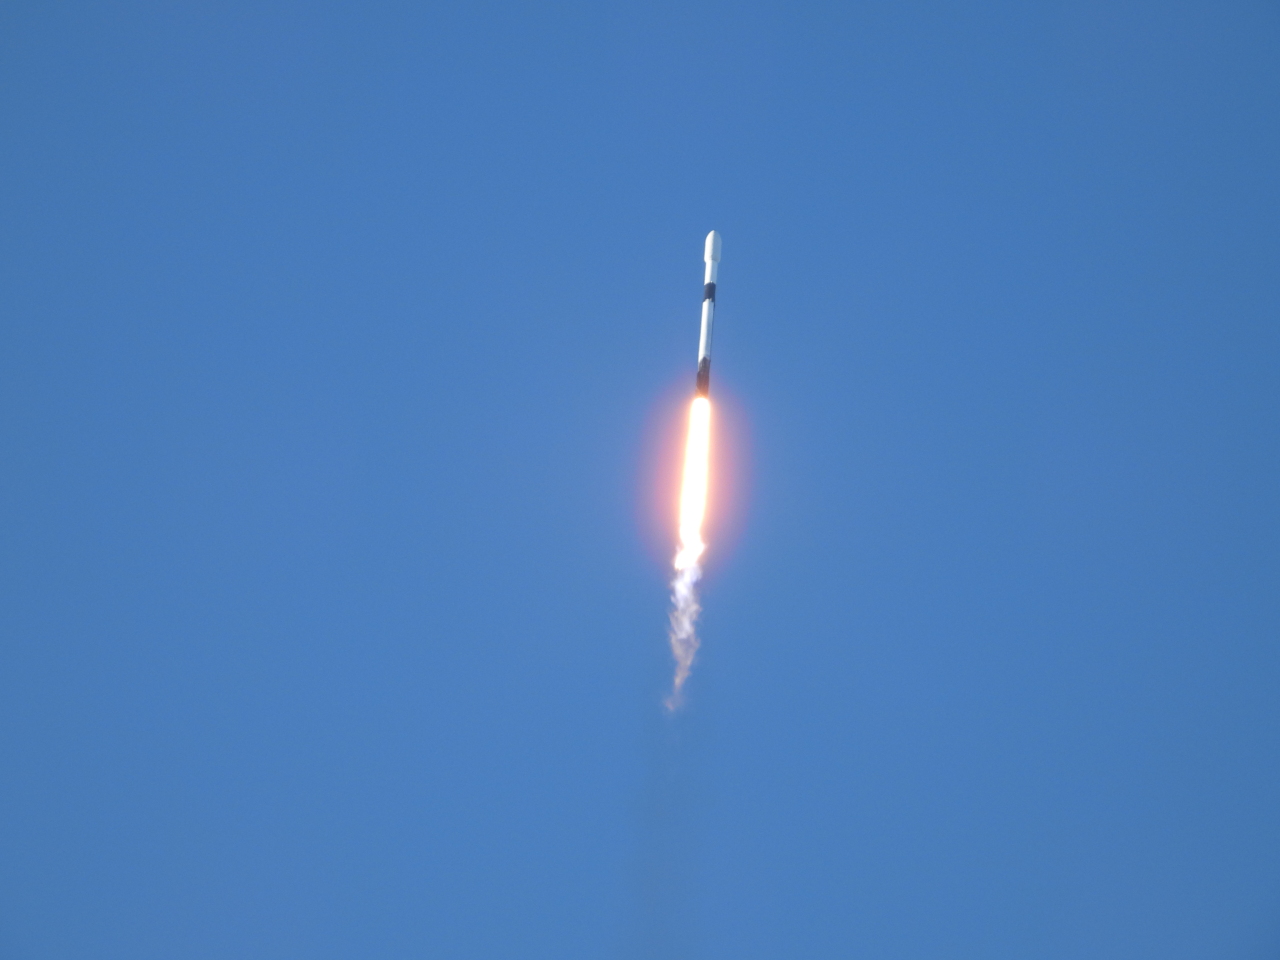 The SpaceX Falcon rocket carrying Danuri, South Korea’s first lunar orbiter, lifts off from Cape Canaveral Space Force Station in Florida at 8:08 a.m. on Friday, Korea time. (Joint Press Corps)